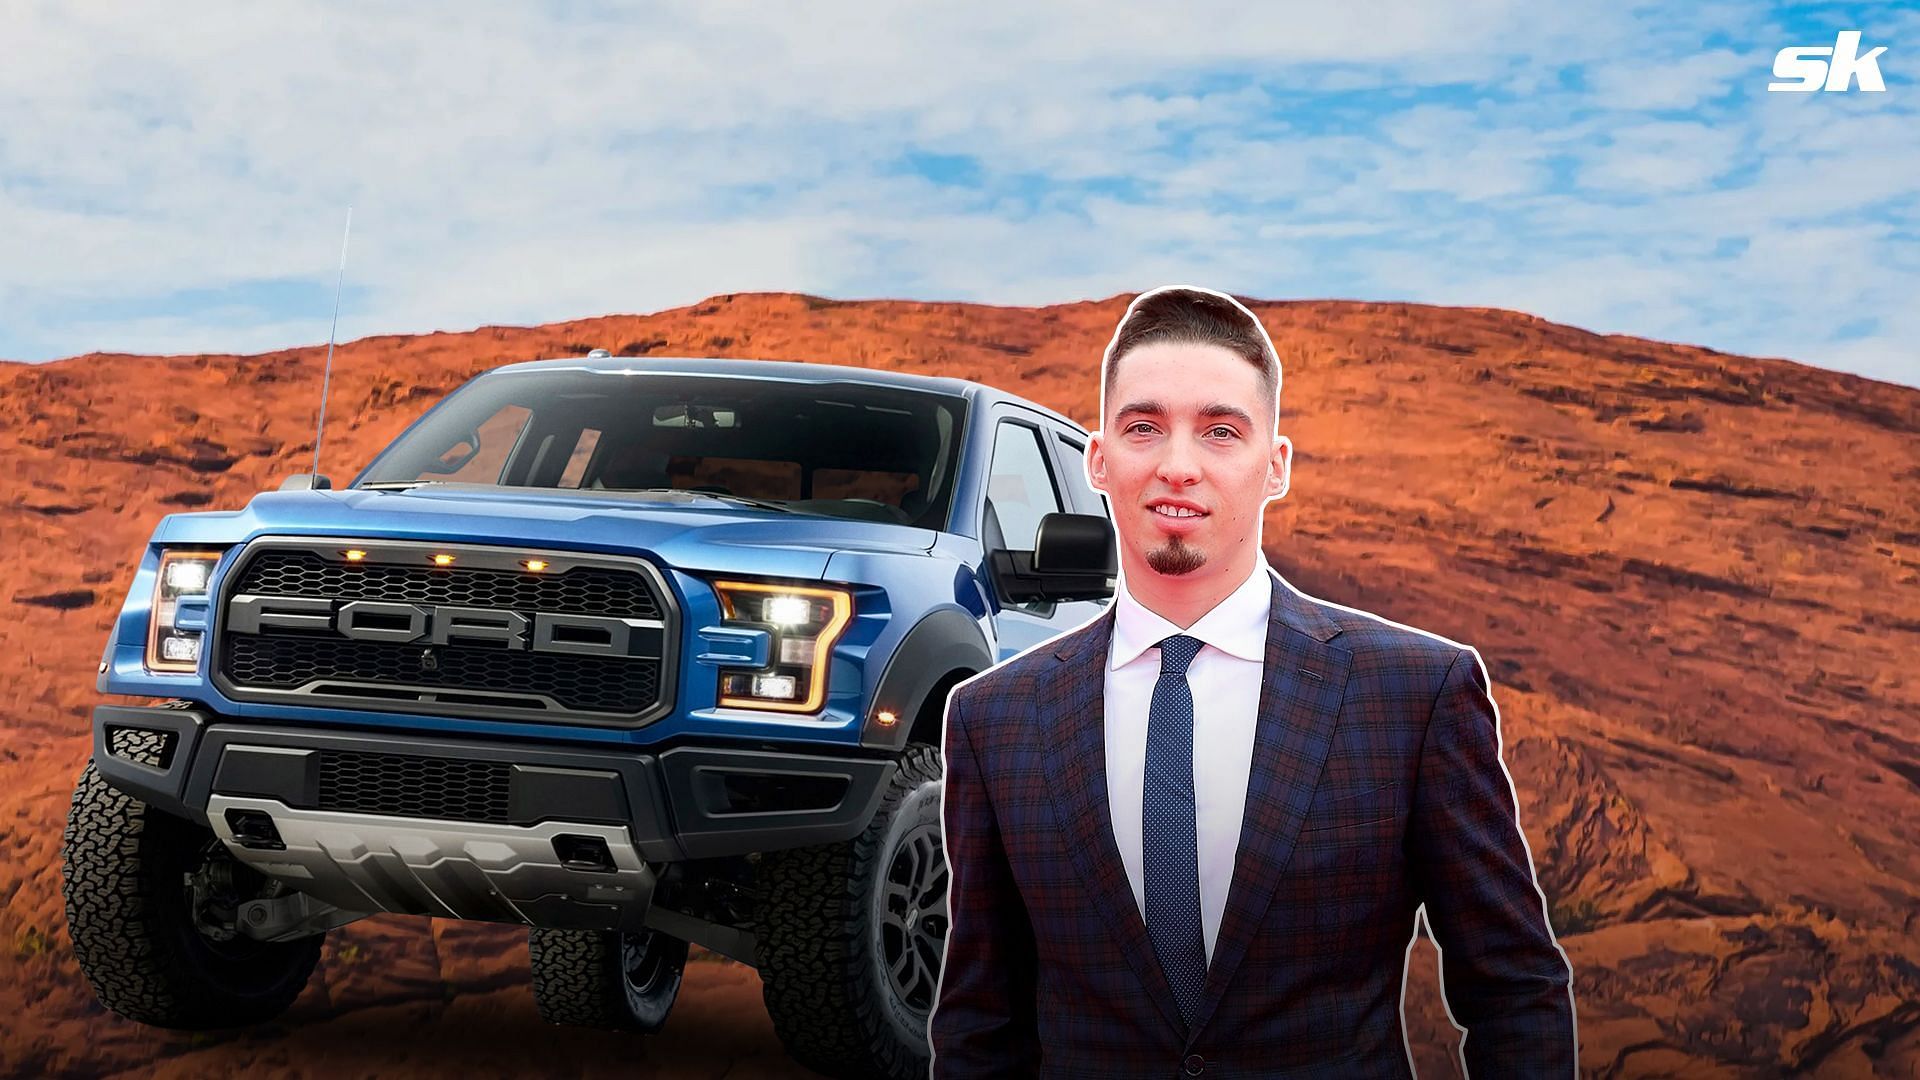 Blake Snell with his Ford Raptor F-150